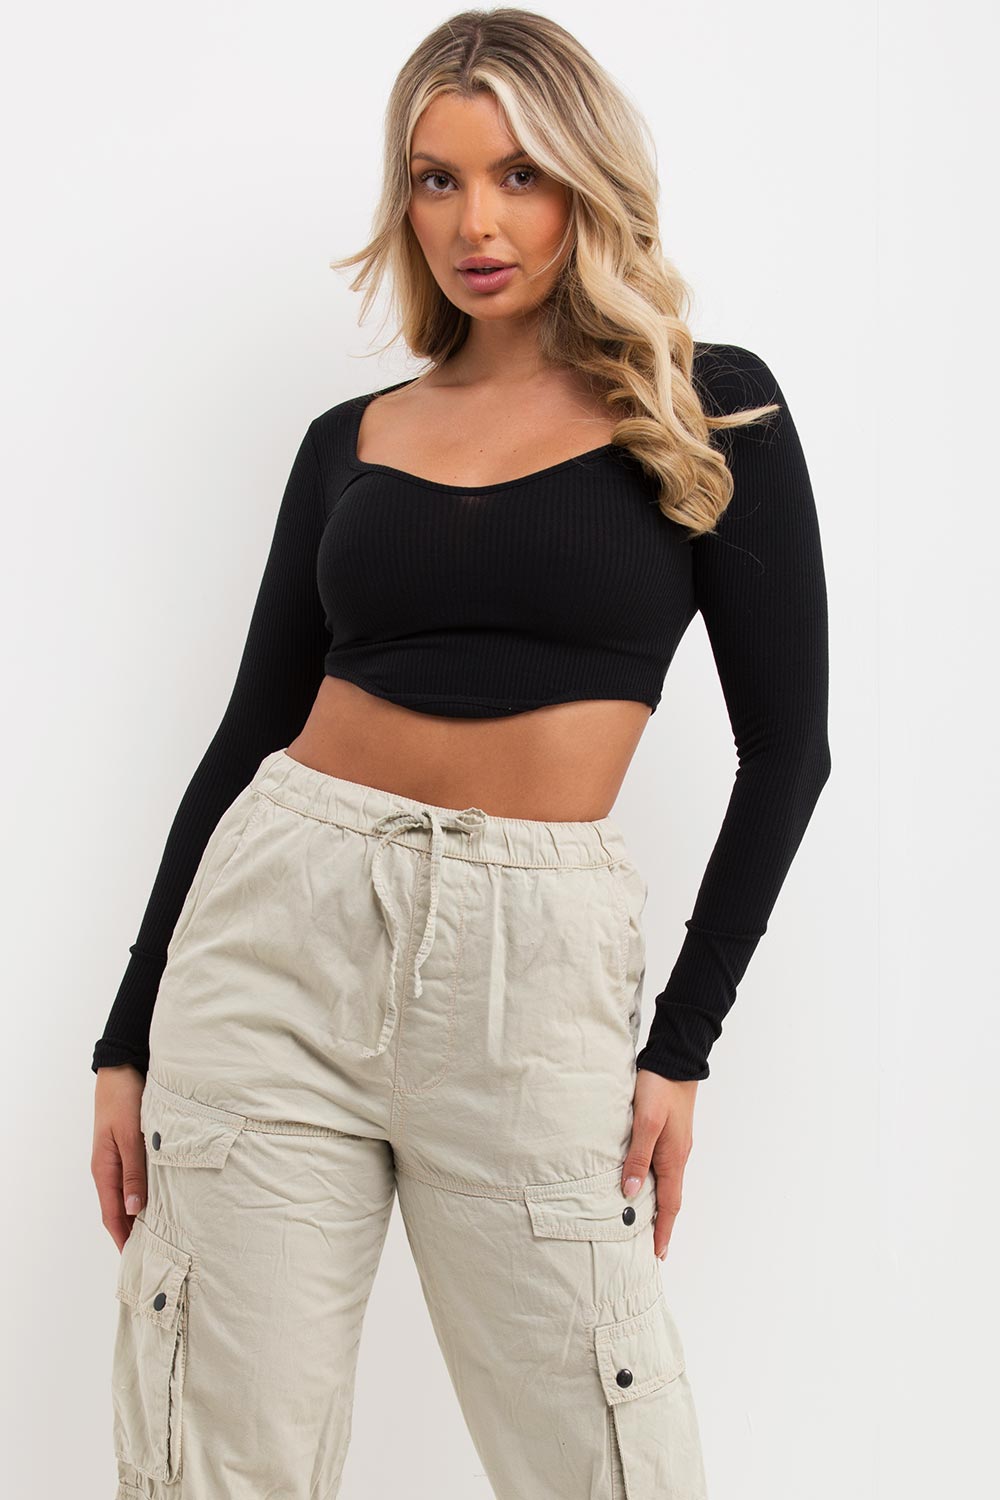 Black Structured Contour Sleeveless Ribbed Crop Top